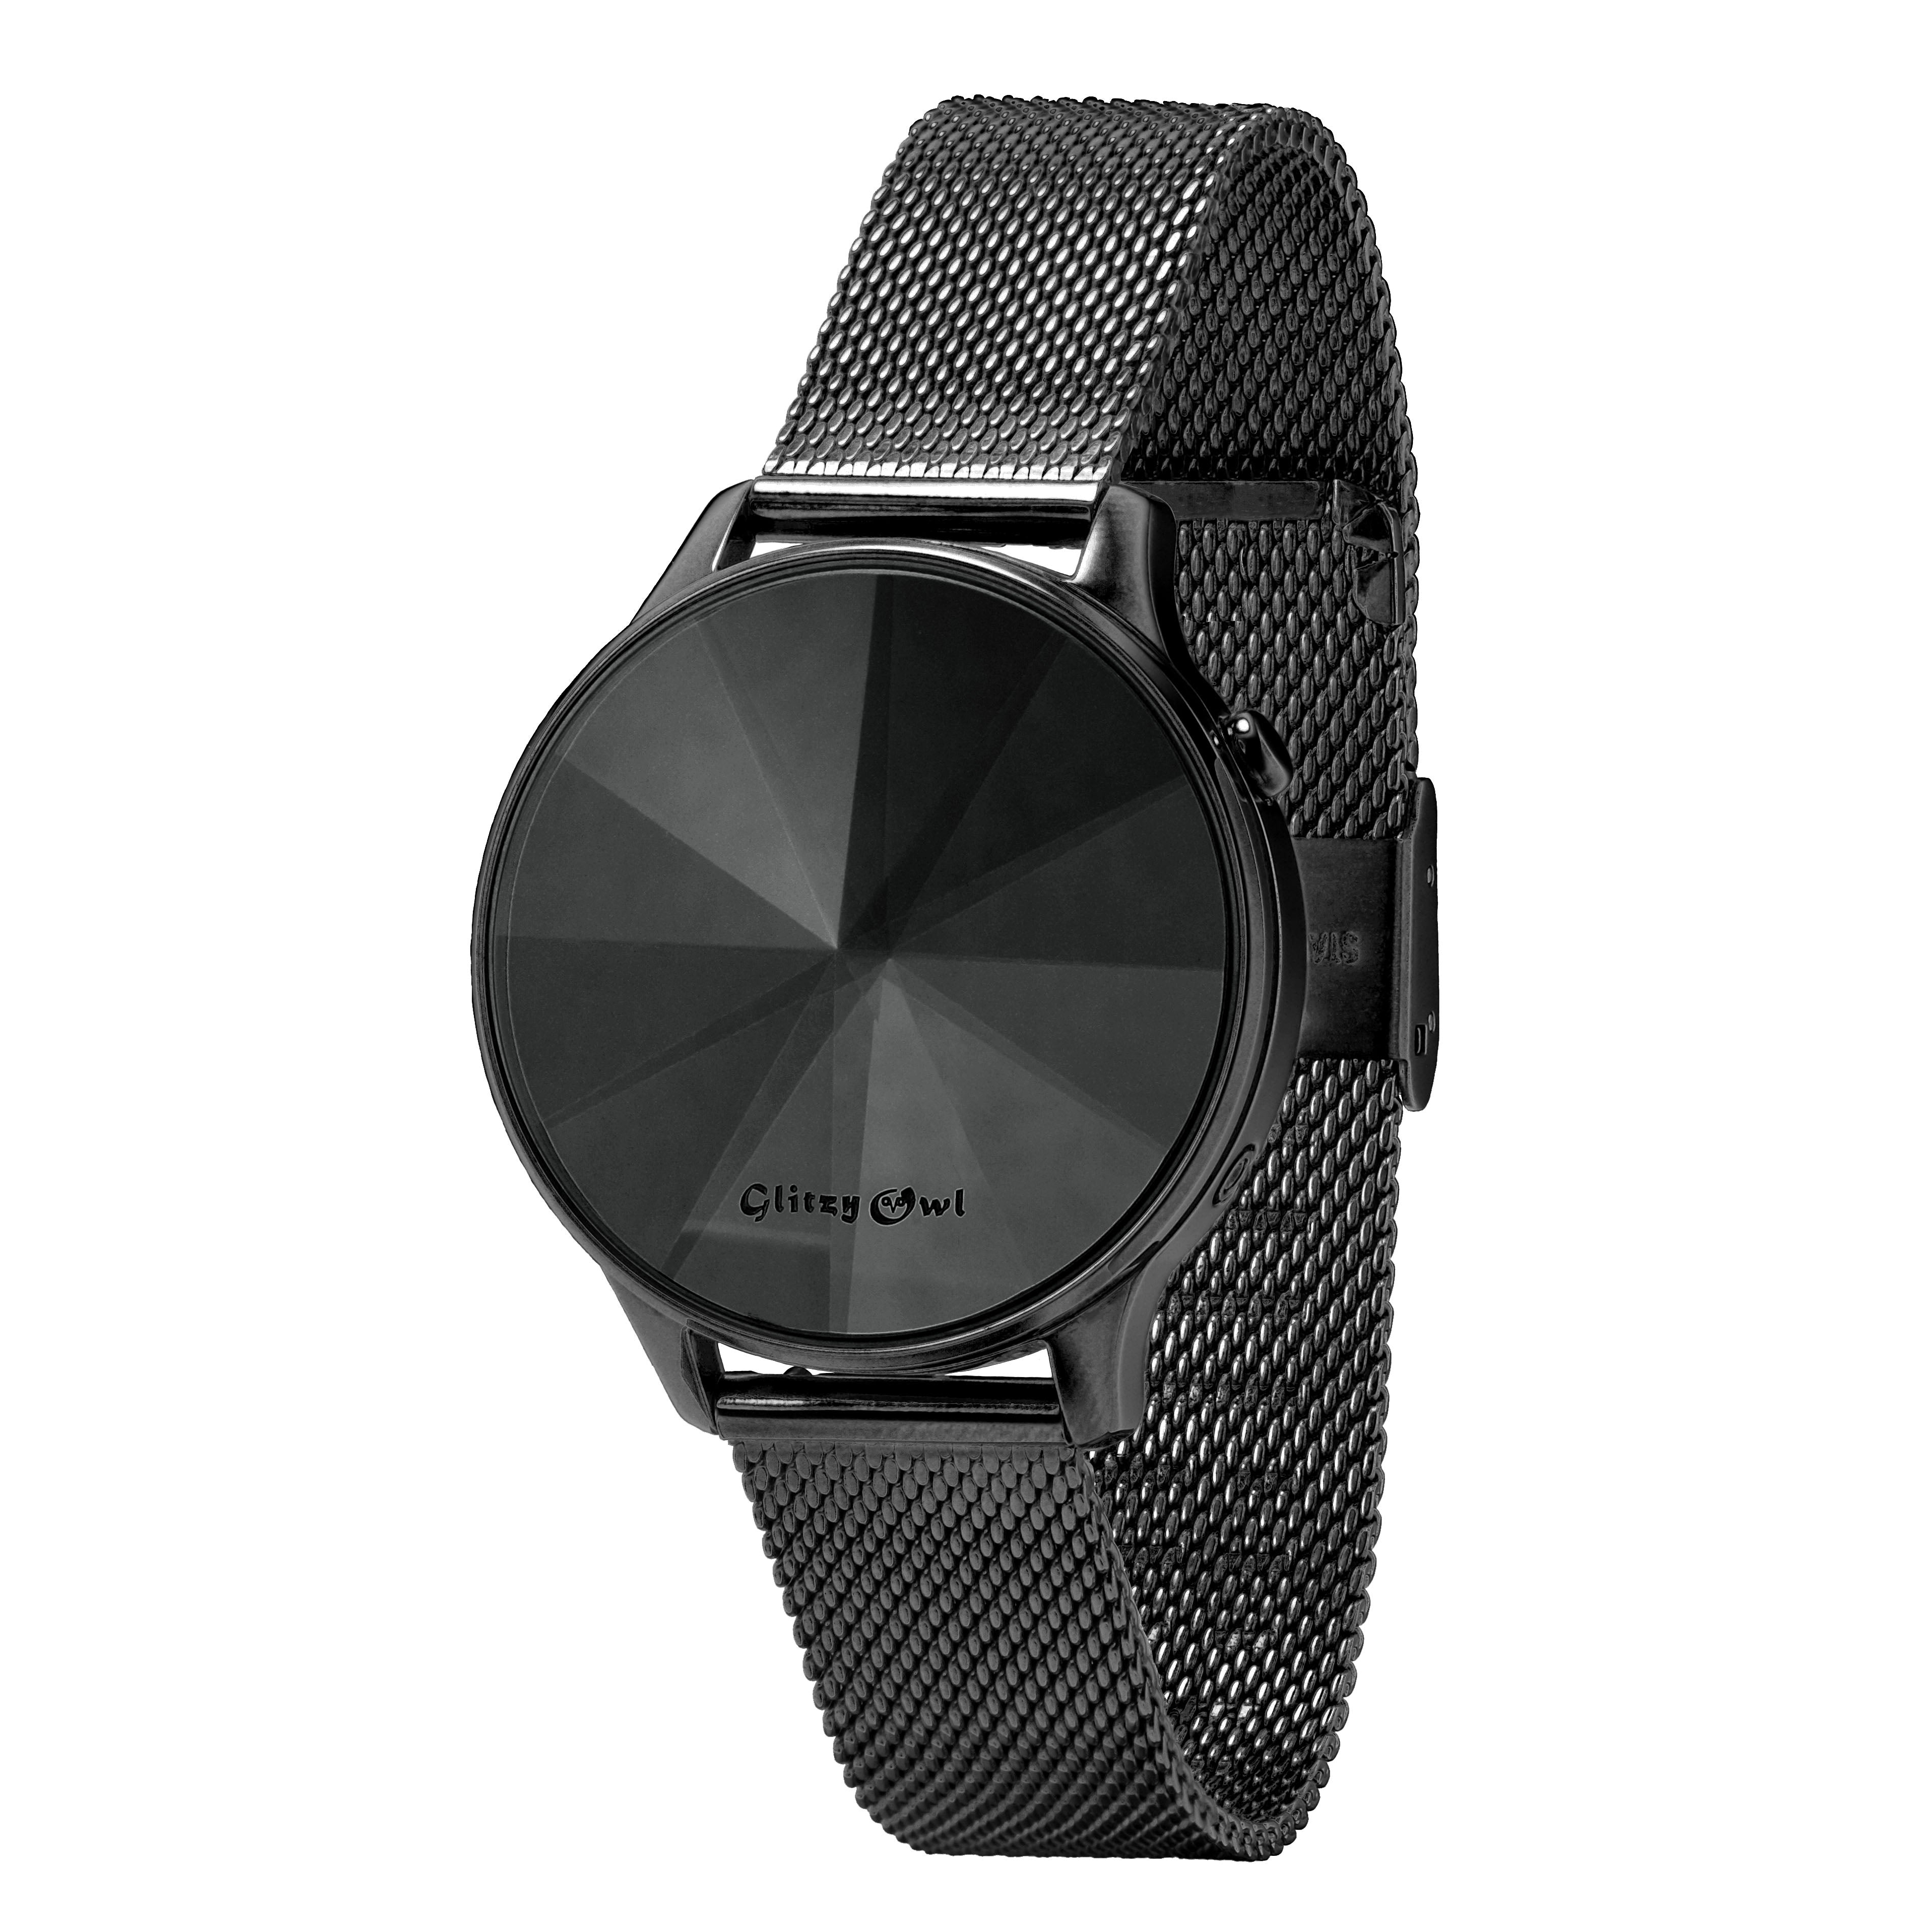 THE DIAMOND LED Black Stainless Steel Watch